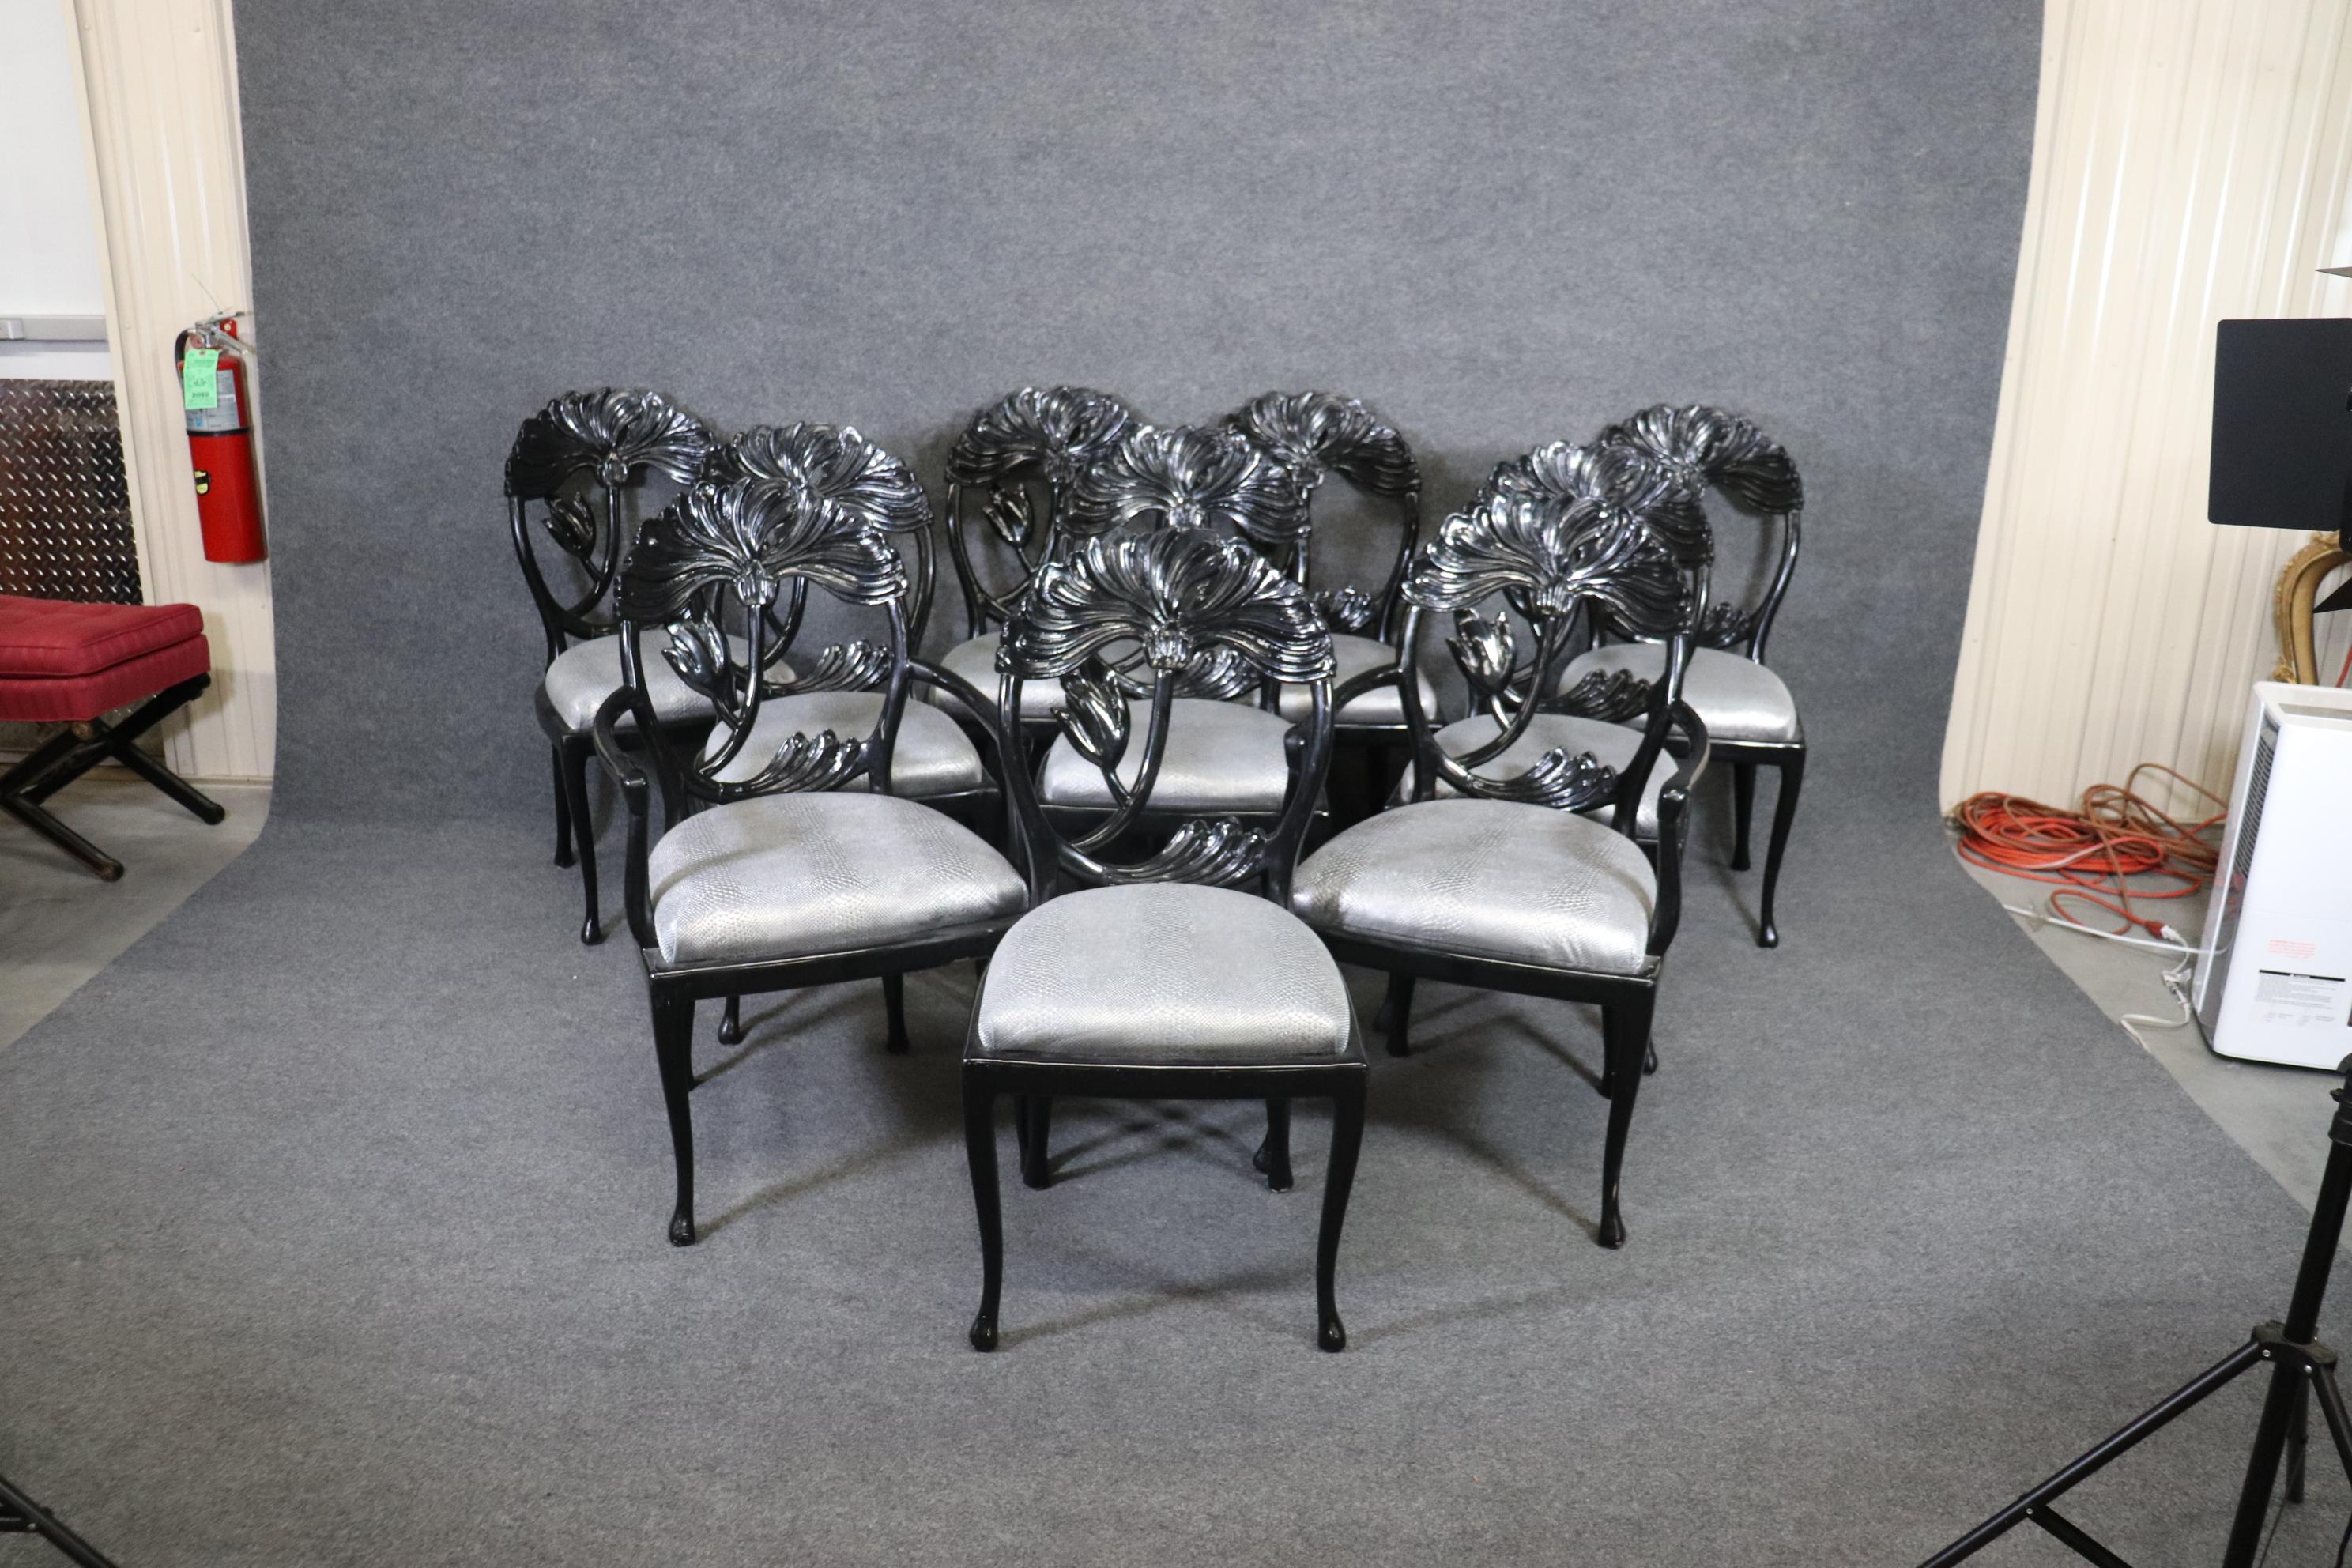 Unknown 10 Black Lacquered Mid-Century Modern Regency Style Dining Chairs, circa 1980